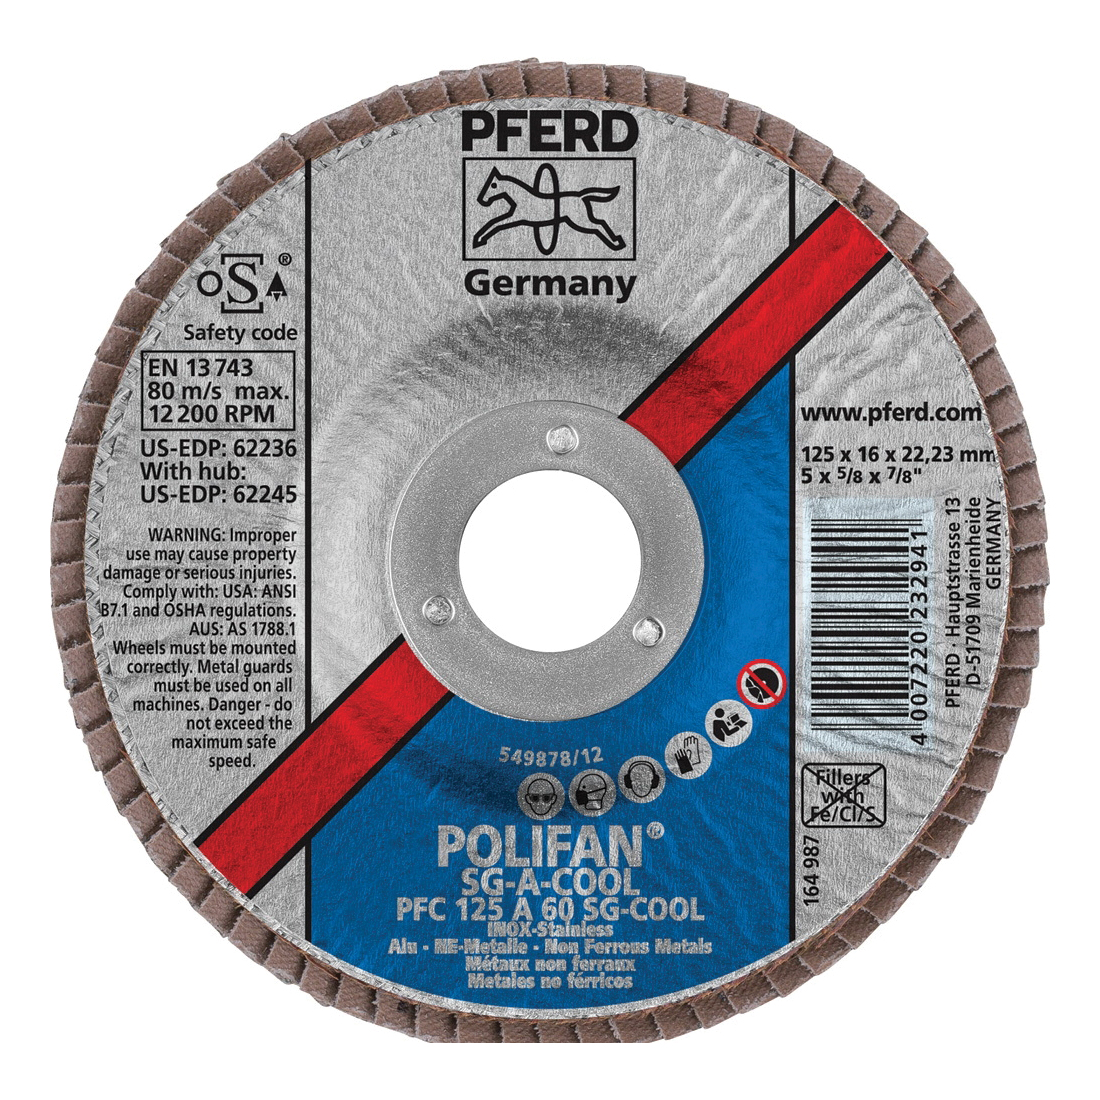 PFERD Polifan® 62236 Performance Line SG A-COOL Unthreaded Coated Abrasive Flap Disc, 5 in Dia, 7/8 in Center Hole, 60 Grit, Aluminum Oxide Abrasive, Type 29 Conical Disc